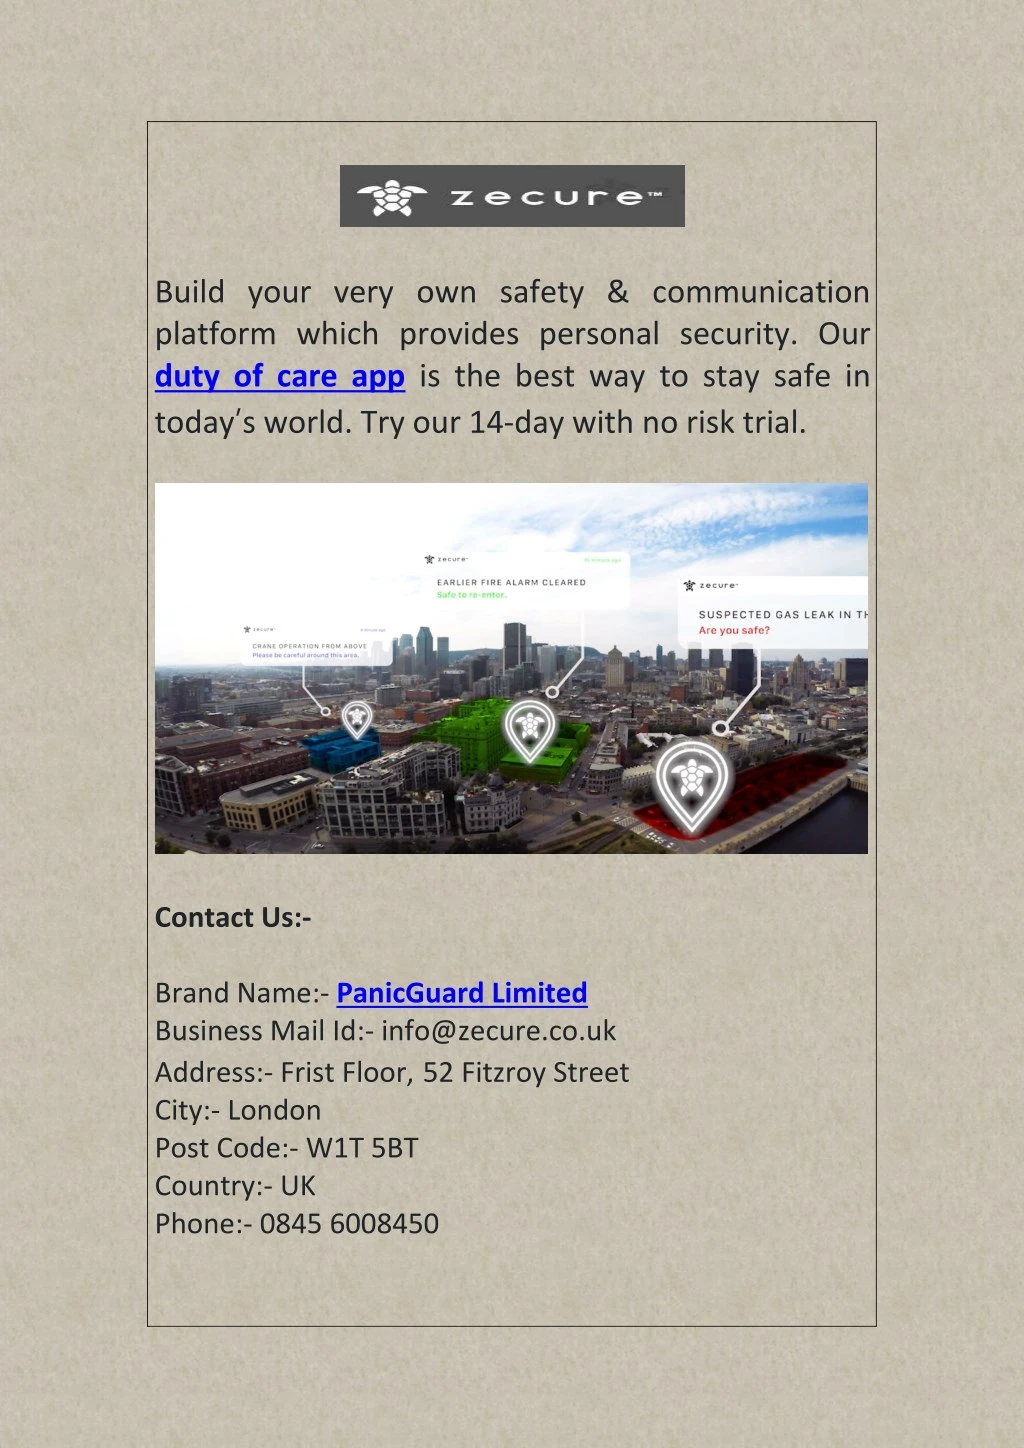 build your very own safety communication platform